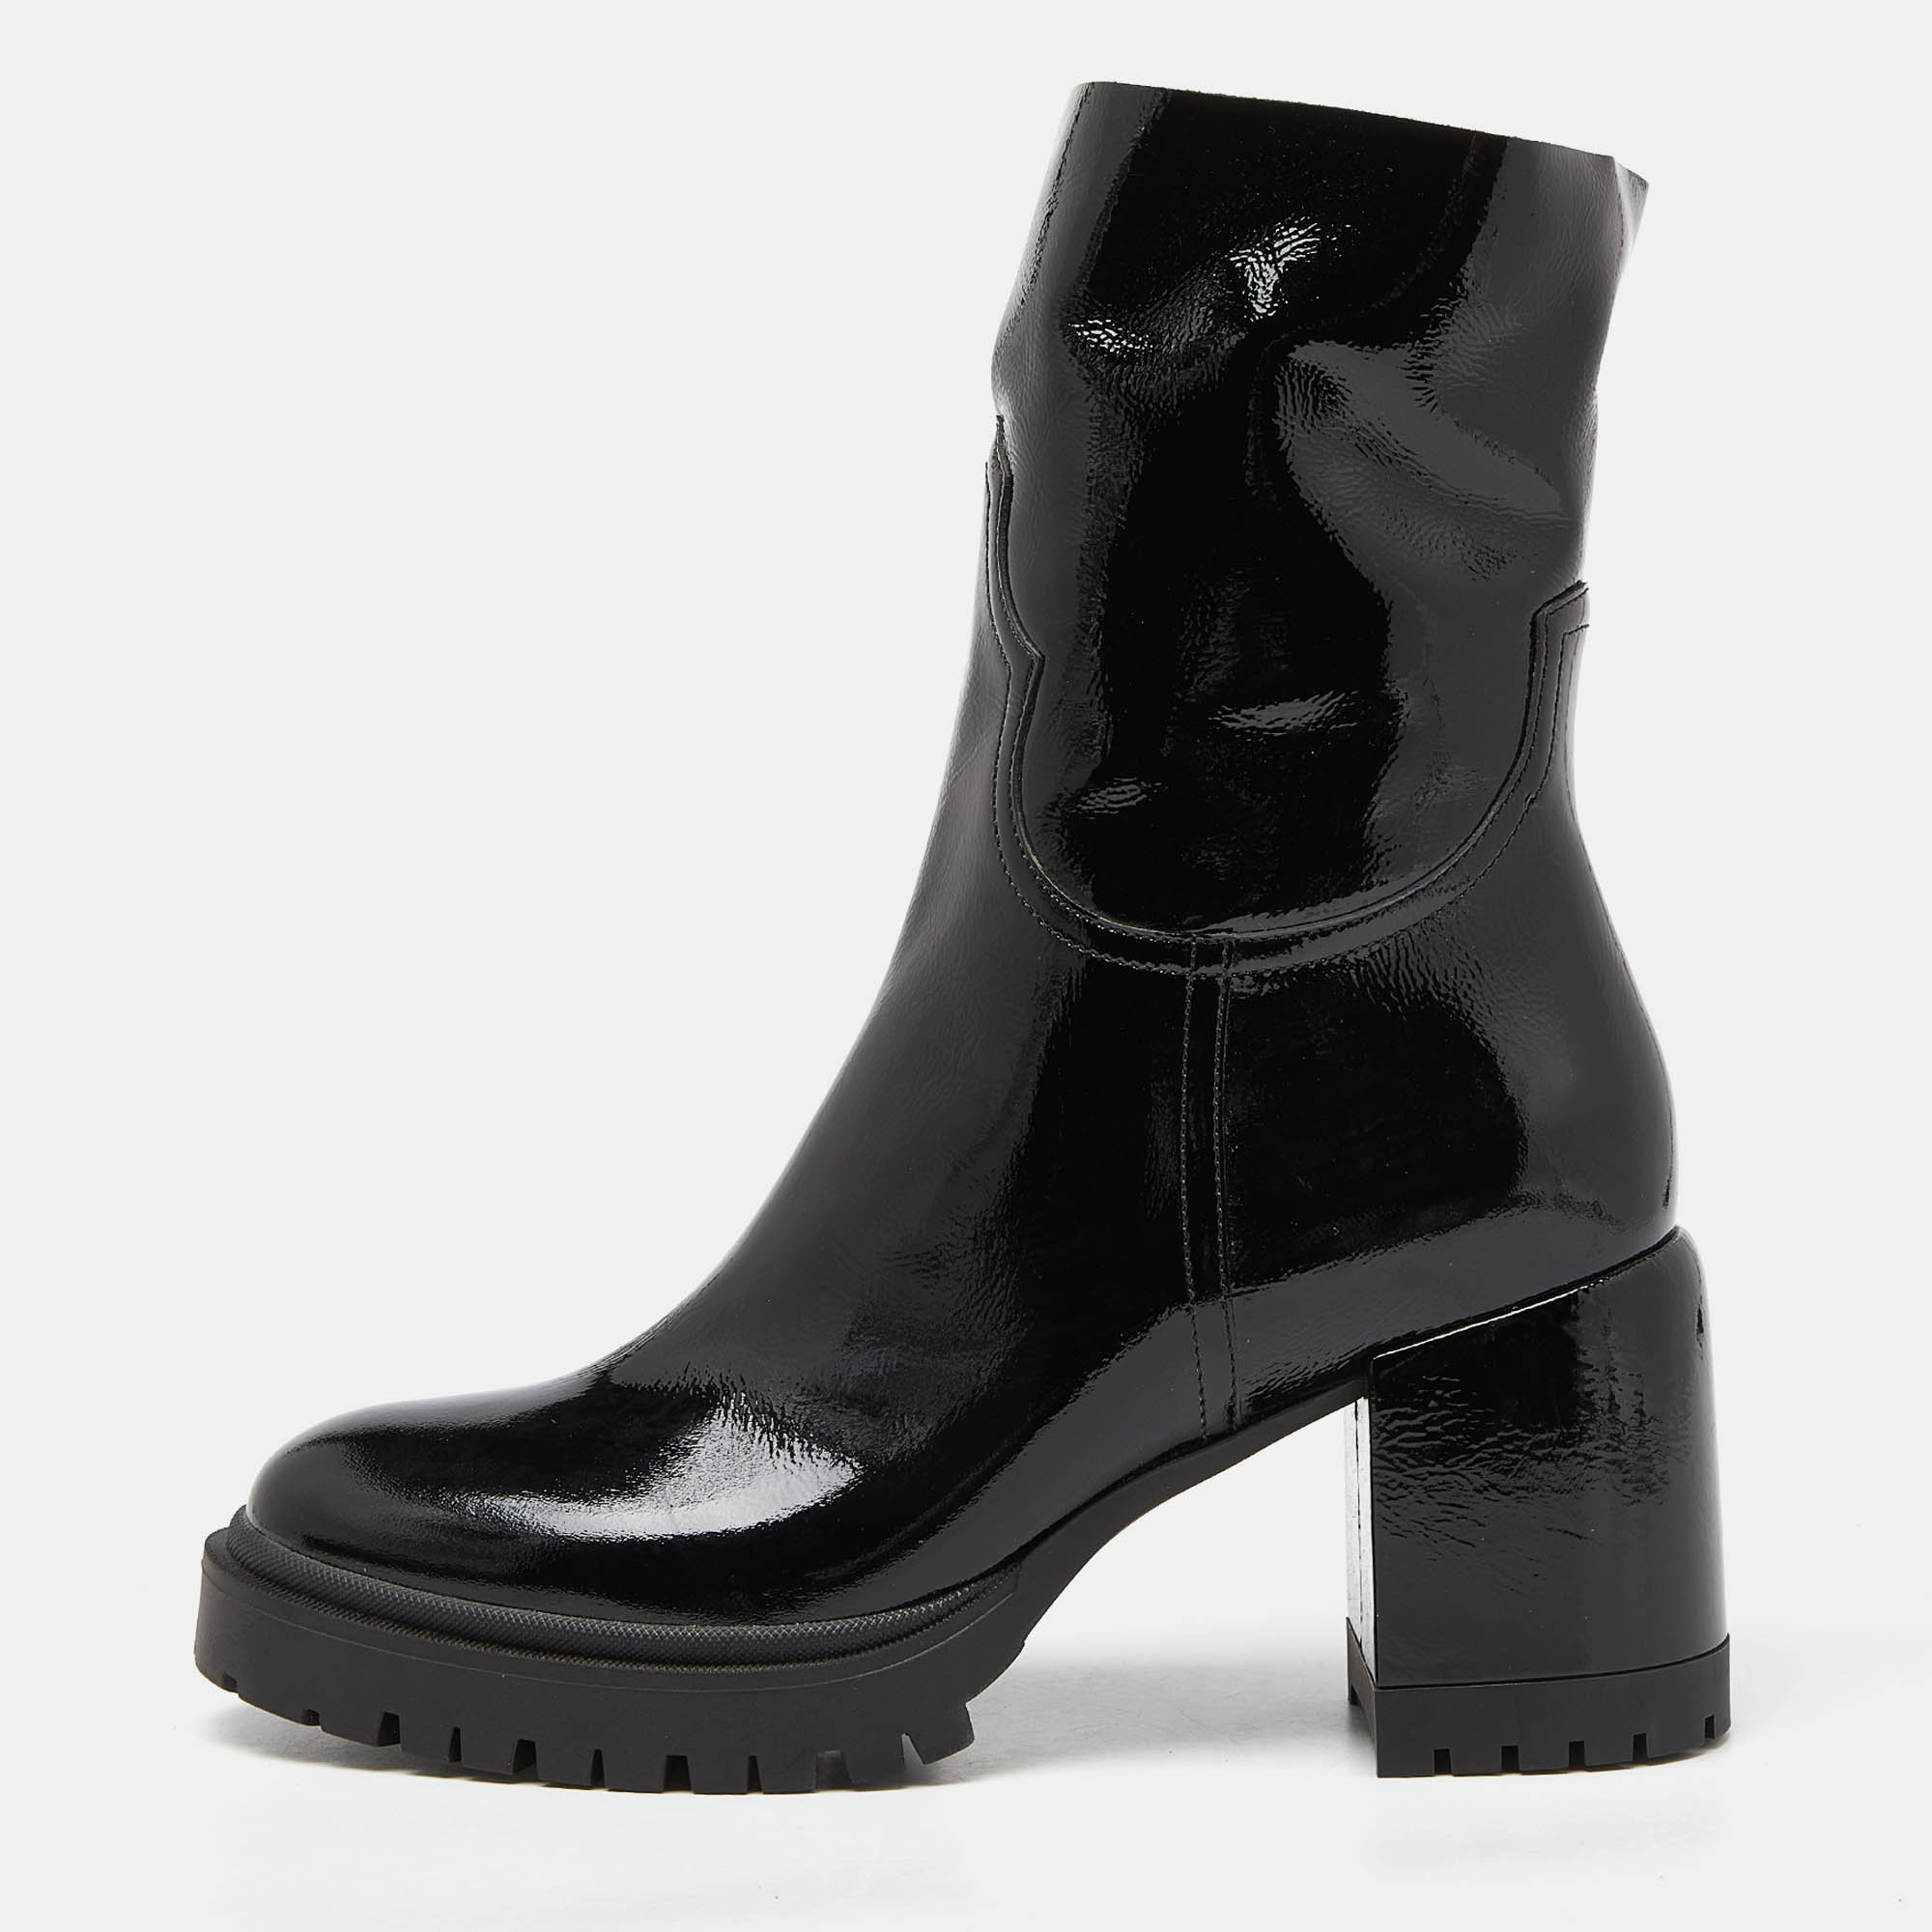 Black Patent Leather Block Heel Ankle Boots